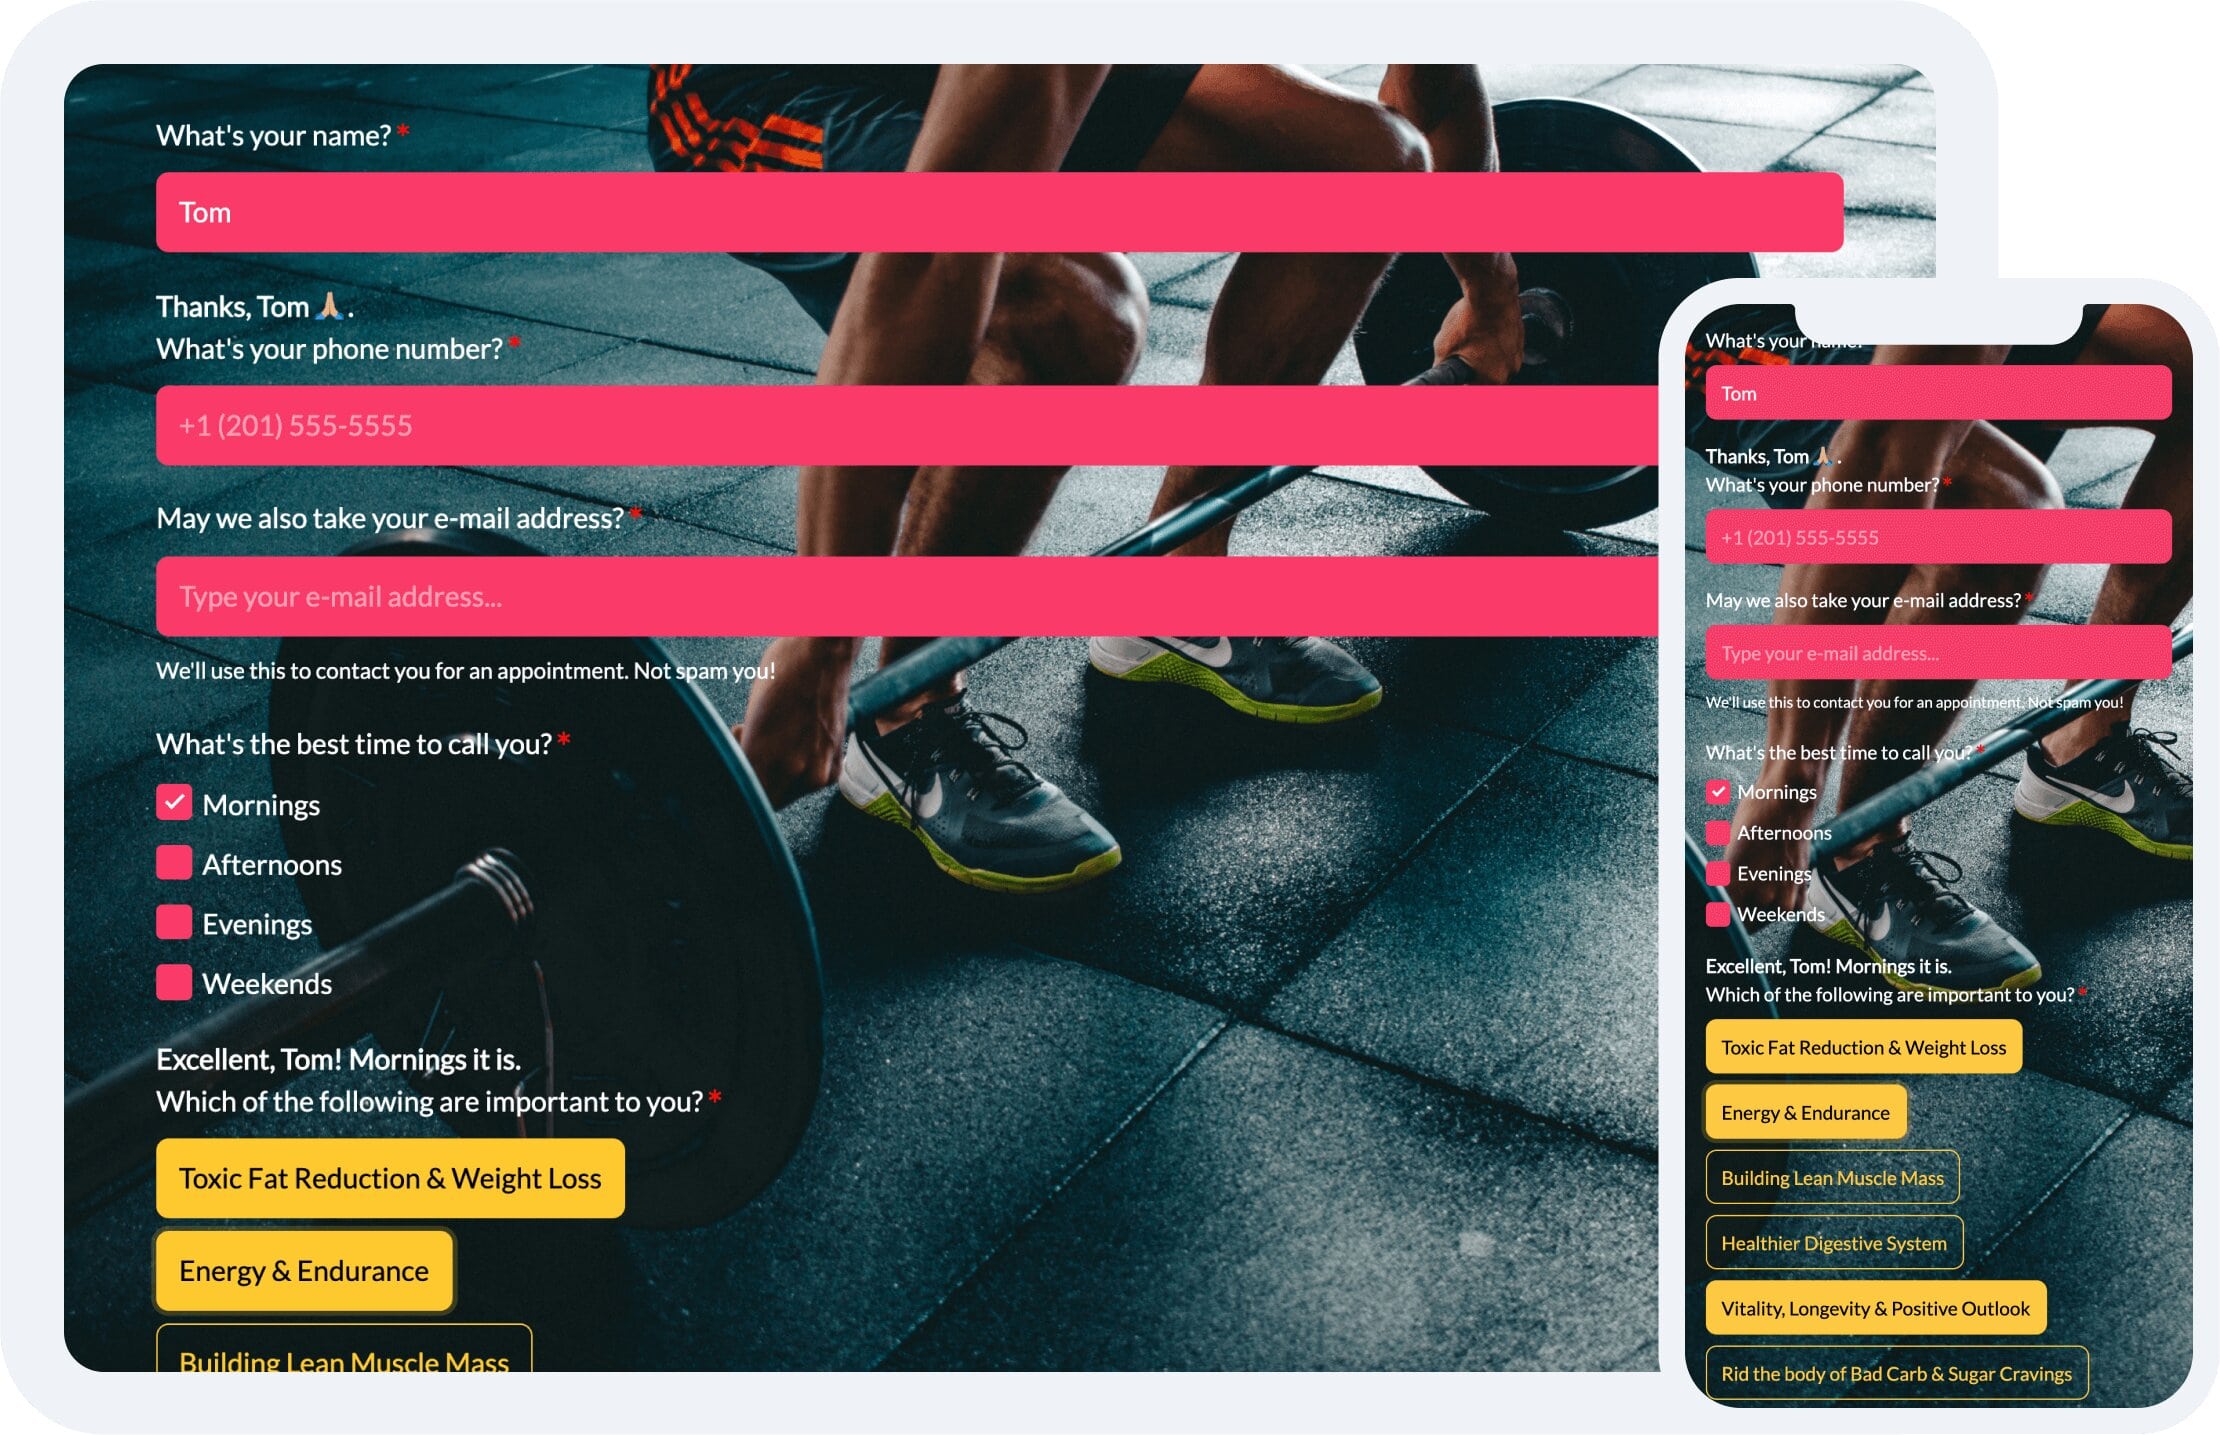 Screenshots of a fitness registration form in the autoscroll form face, shown on a tablet and a mobile phone.